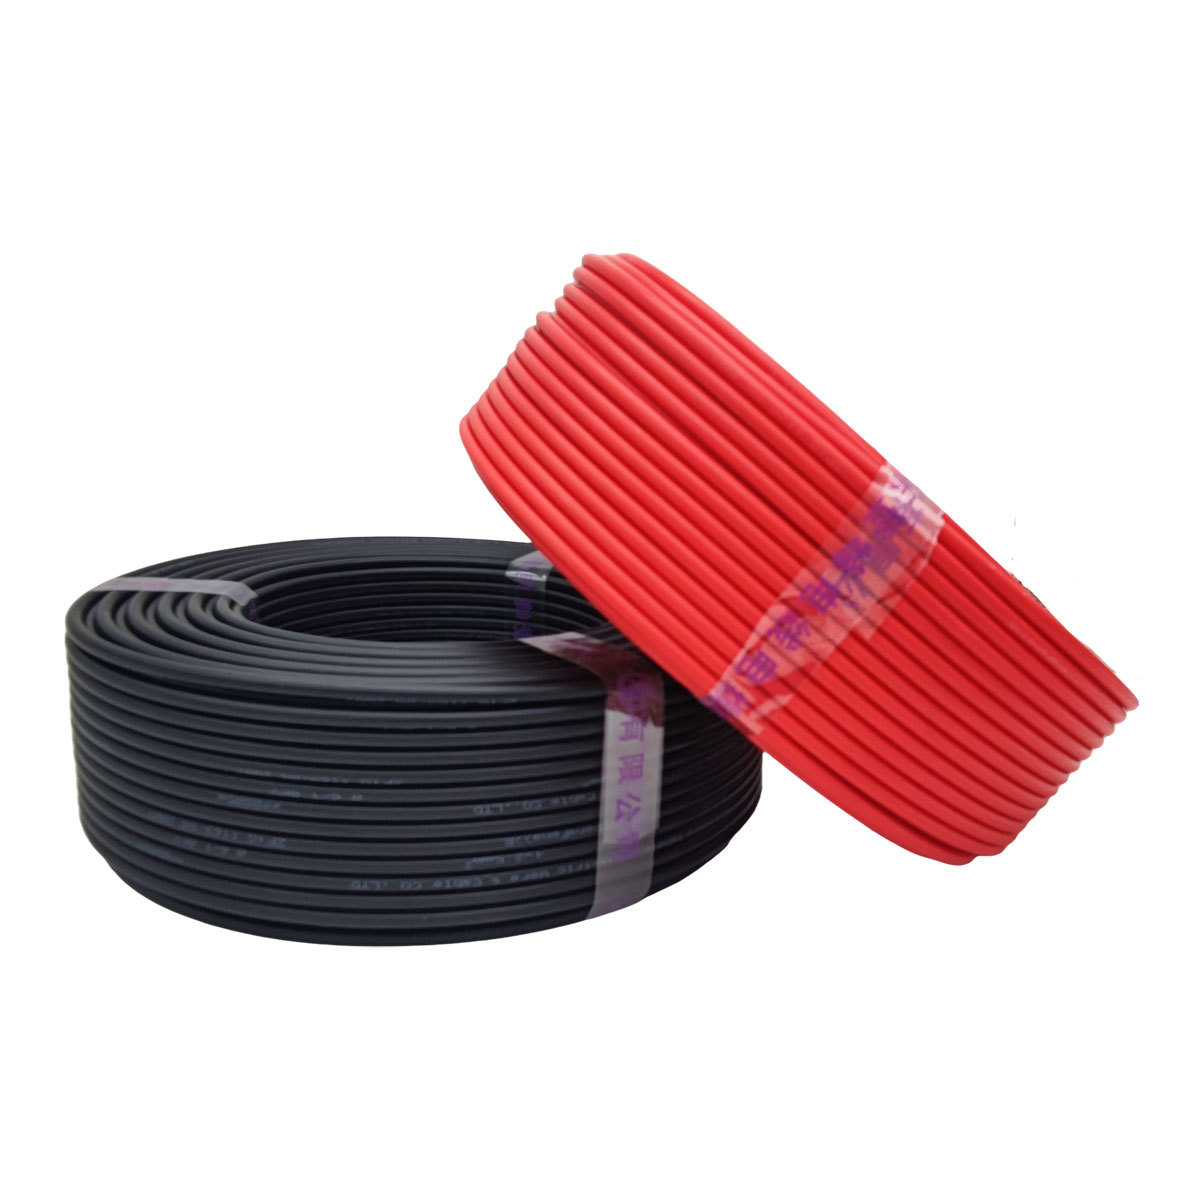 PV1-F-Photovoltaic DC wire